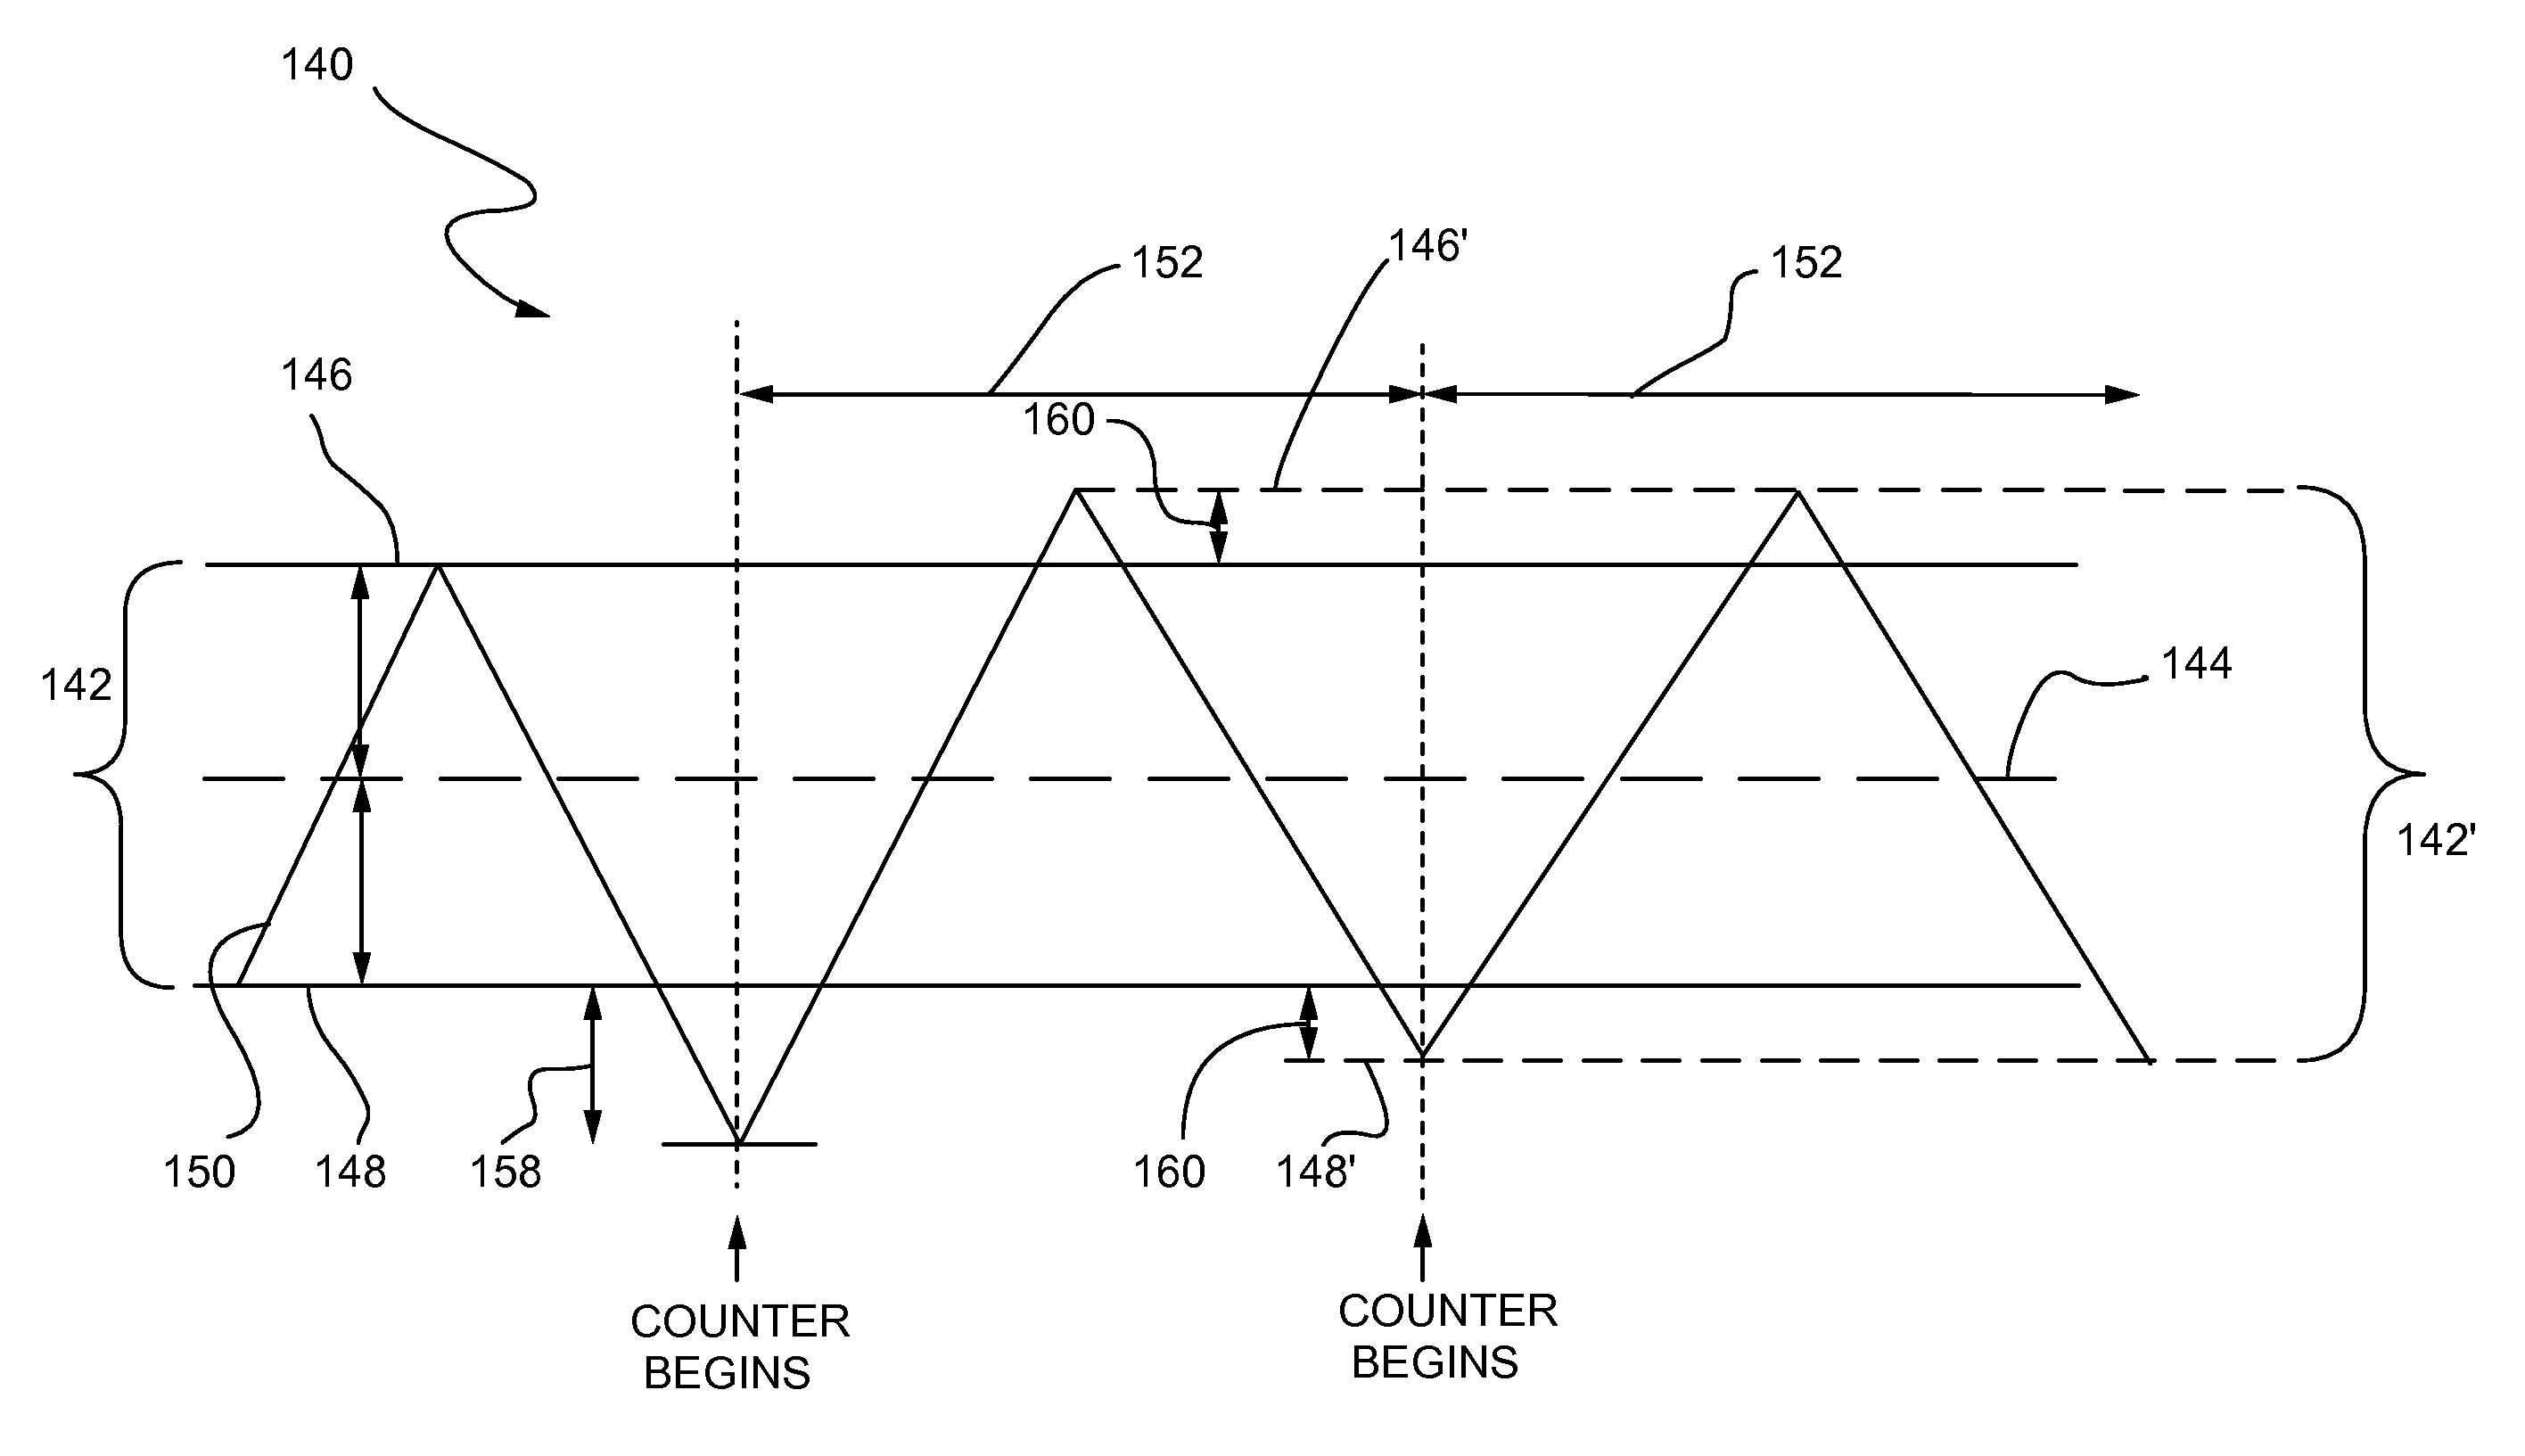 Compensating hysteresis bands to hold specified switching frequency